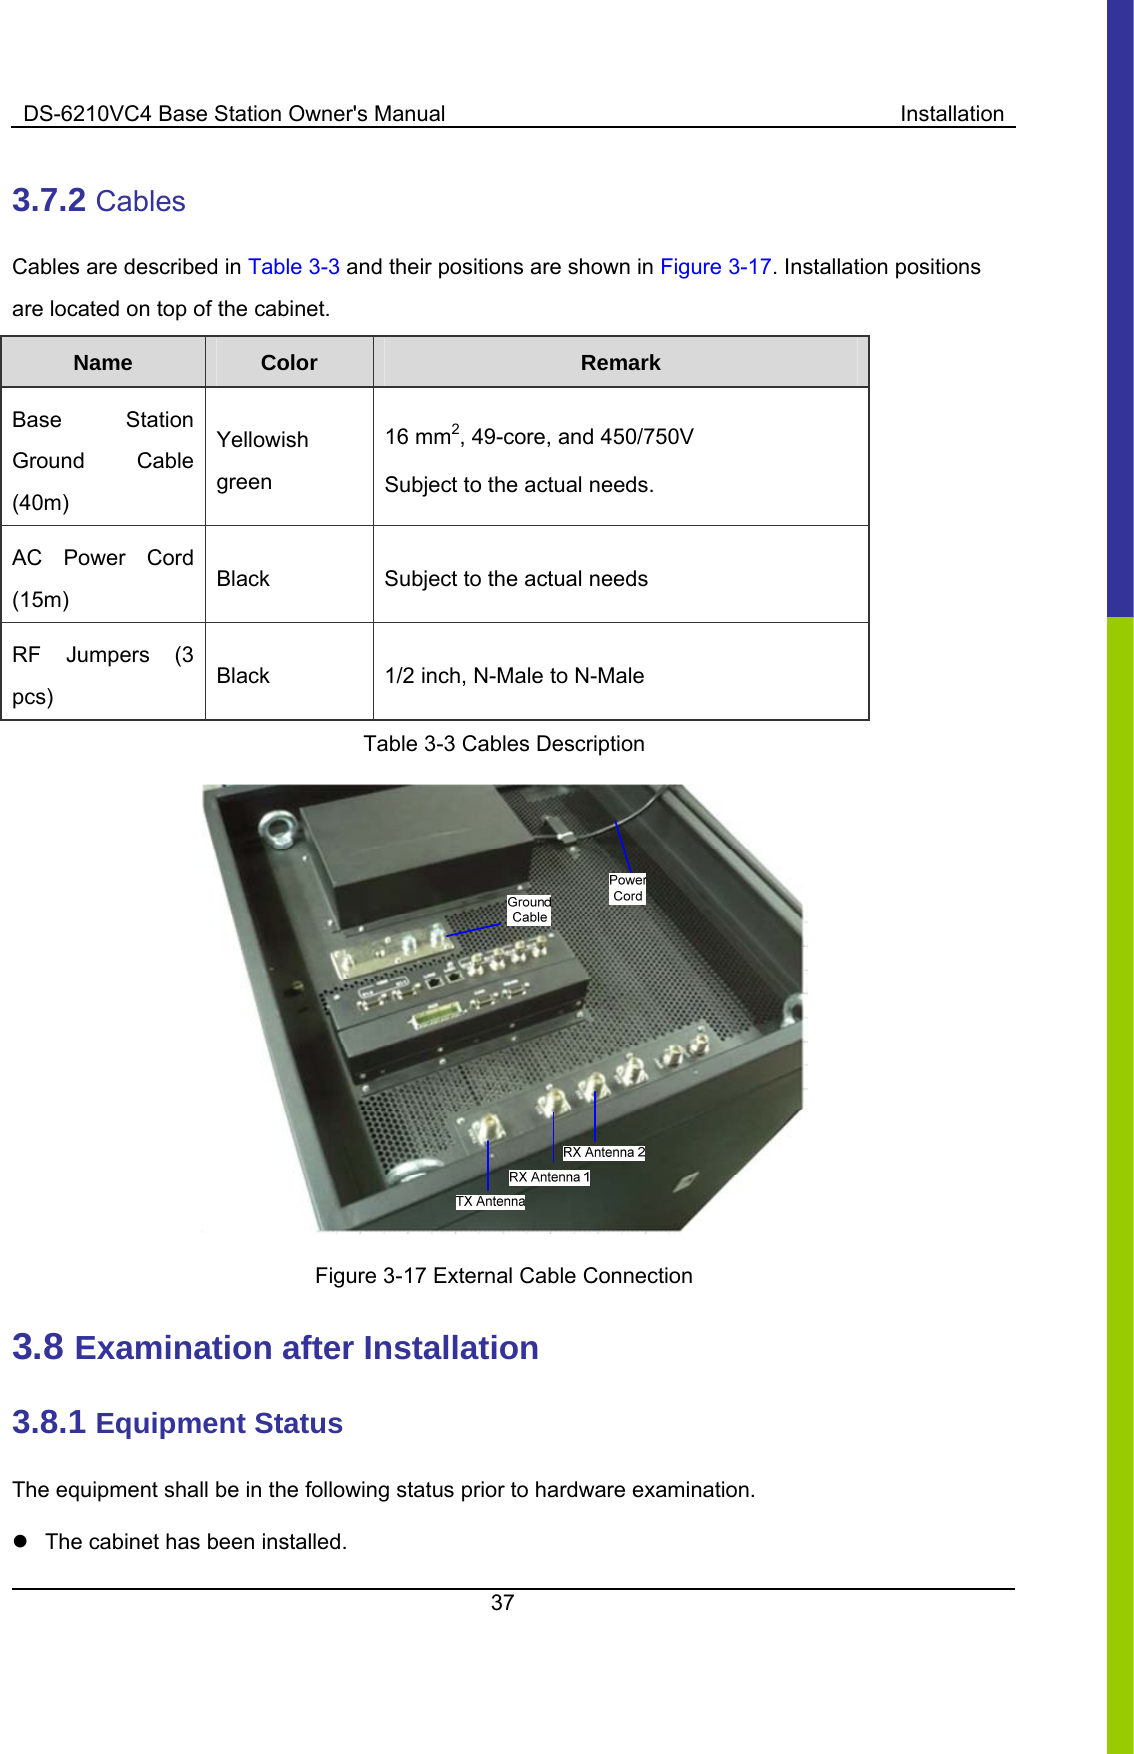 DS-6210VC4 Base Station Owner&apos;s Manual  Installation 37  3.7.2 Cables Cables are described in Table 3-3 and their positions are shown in Figure 3-17. Installation positions are located on top of the cabinet. Name   Color  Remark  Base Station Ground Cable (40m) Yellowish green 16 mm2, 49-core, and 450/750V Subject to the actual needs.   AC Power Cord (15m) Black  Subject to the actual needs RF Jumpers (3 pcs) Black  1/2 inch, N-Male to N-Male Table 3-3 Cables Description    Figure 3-17 External Cable Connection   3.8 Examination after Installation 3.8.1 Equipment Status The equipment shall be in the following status prior to hardware examination.   z  The cabinet has been installed.   